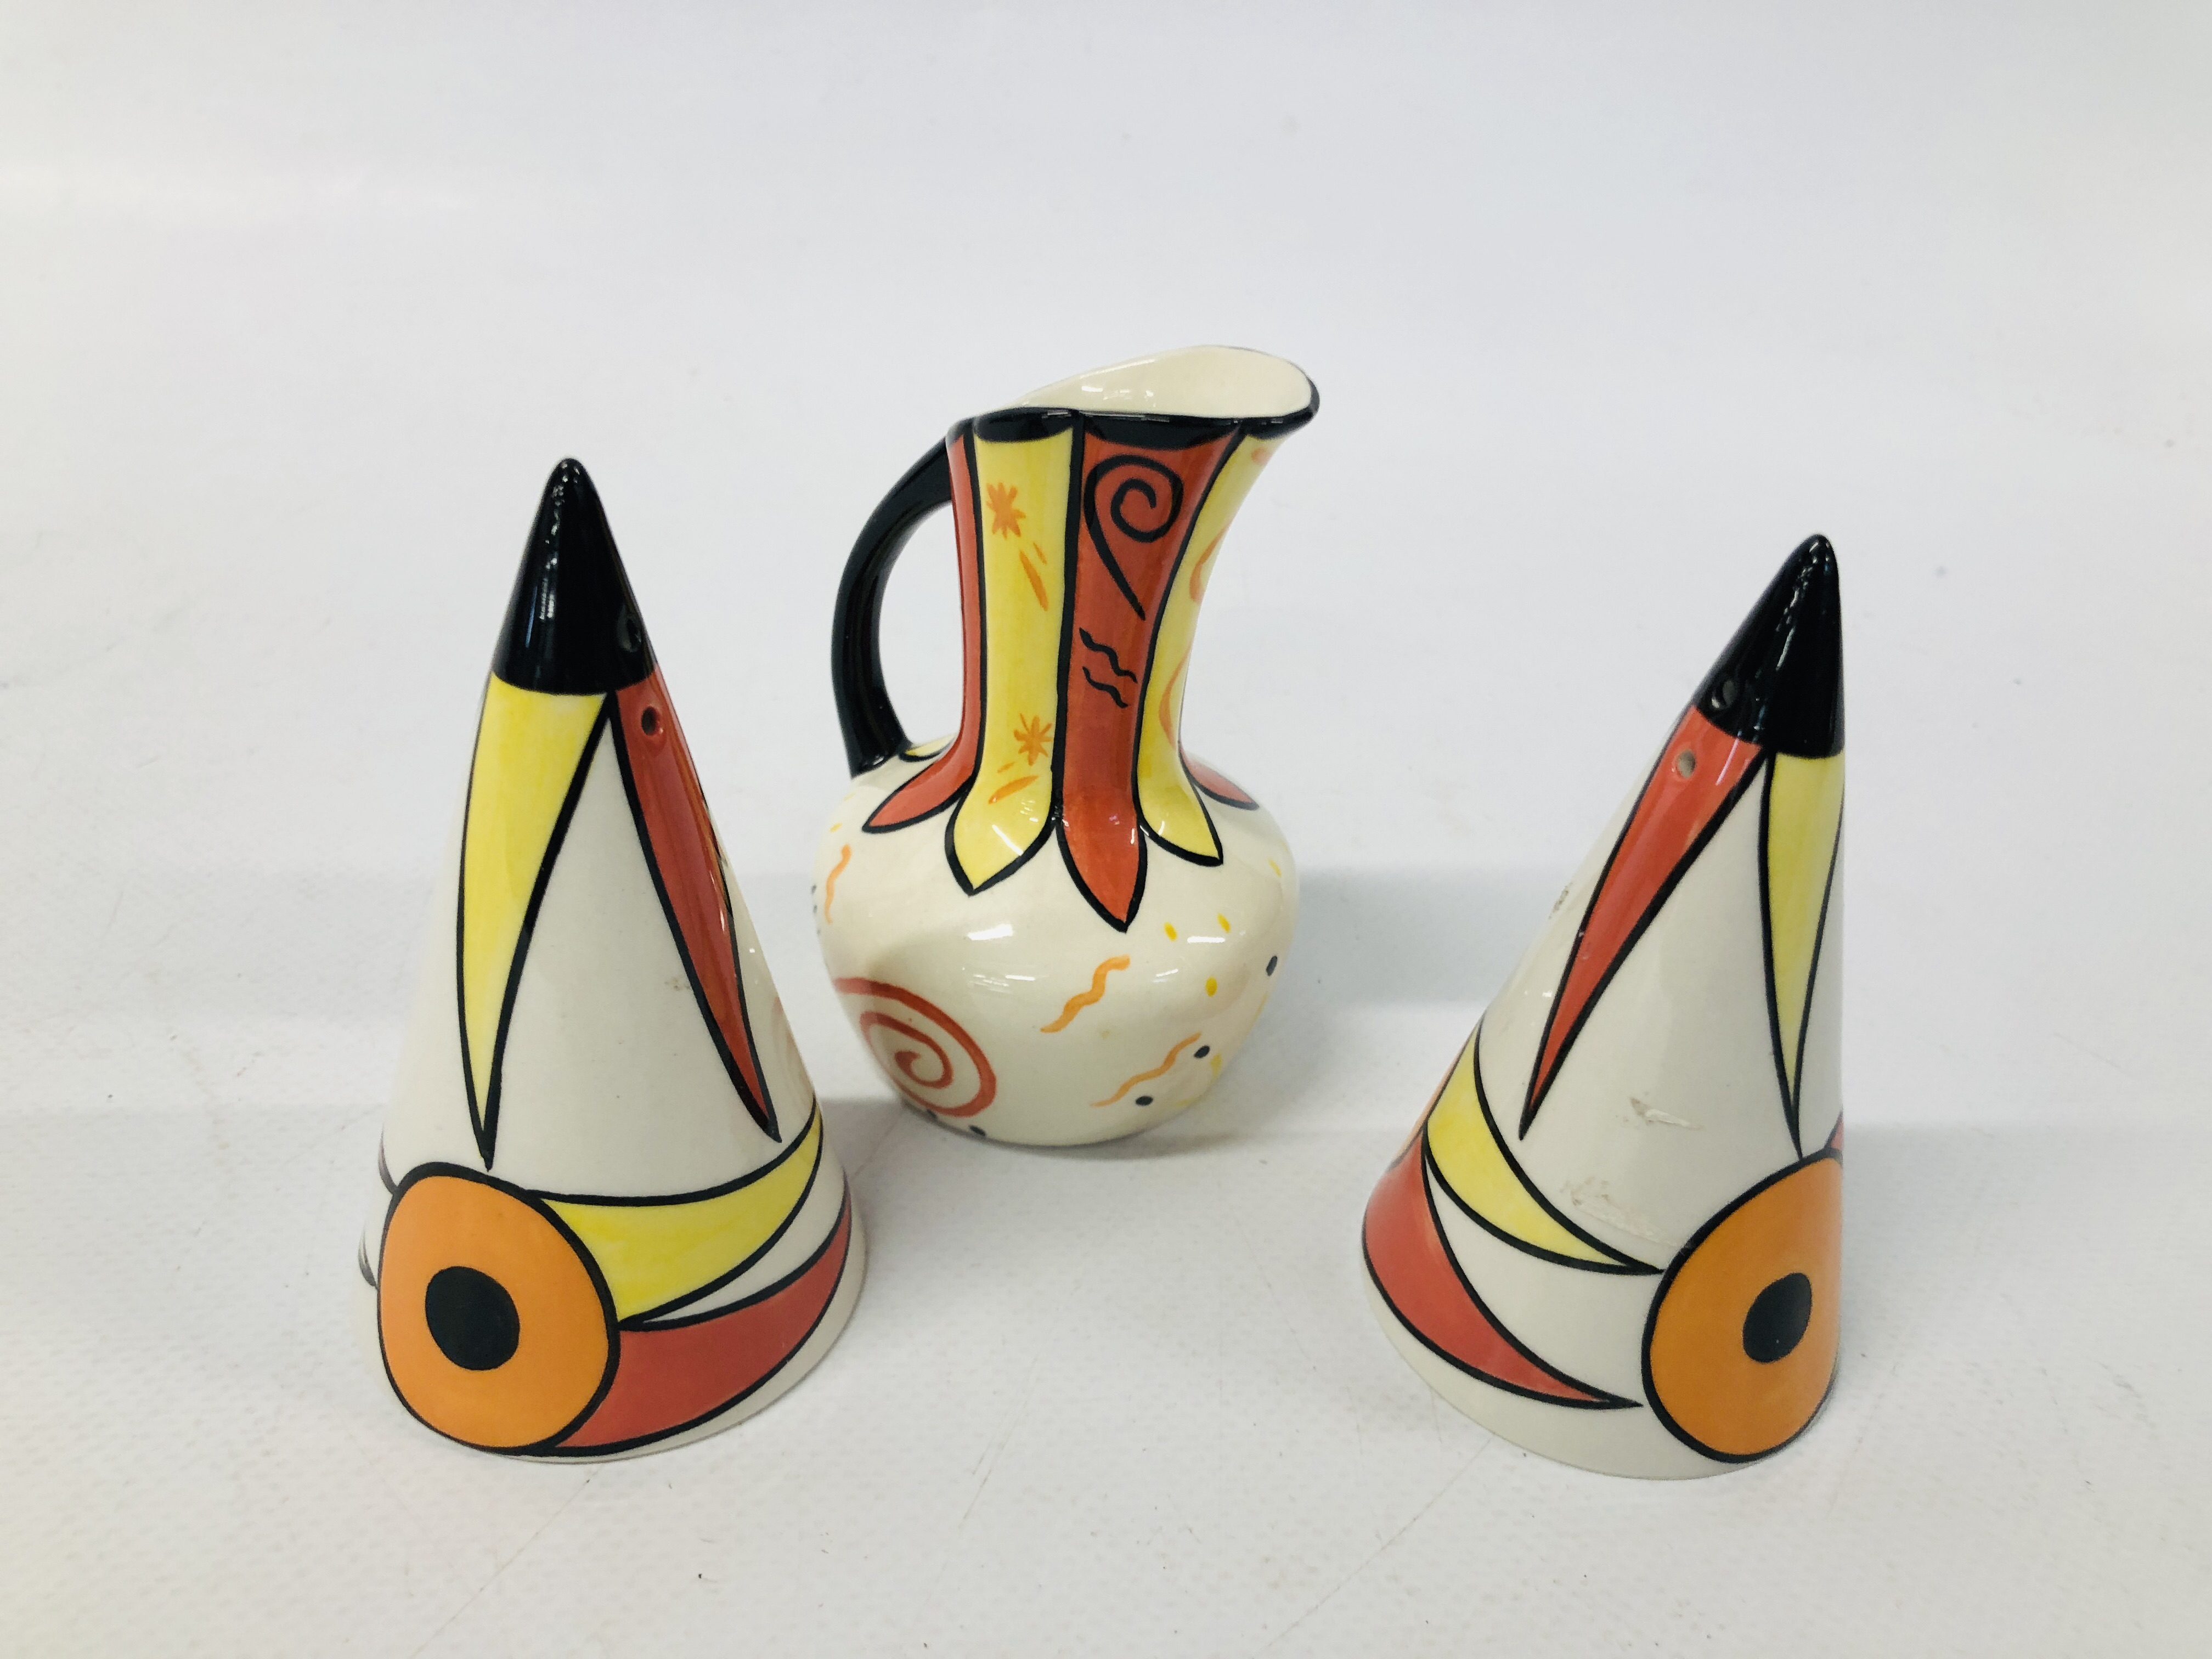 A 21st COLLECTORS EDITION MILK JUG AND SALT AND PEPPER SHAKERS SIGNED BY LORNA BAILEY, H 9CM. - Image 3 of 4